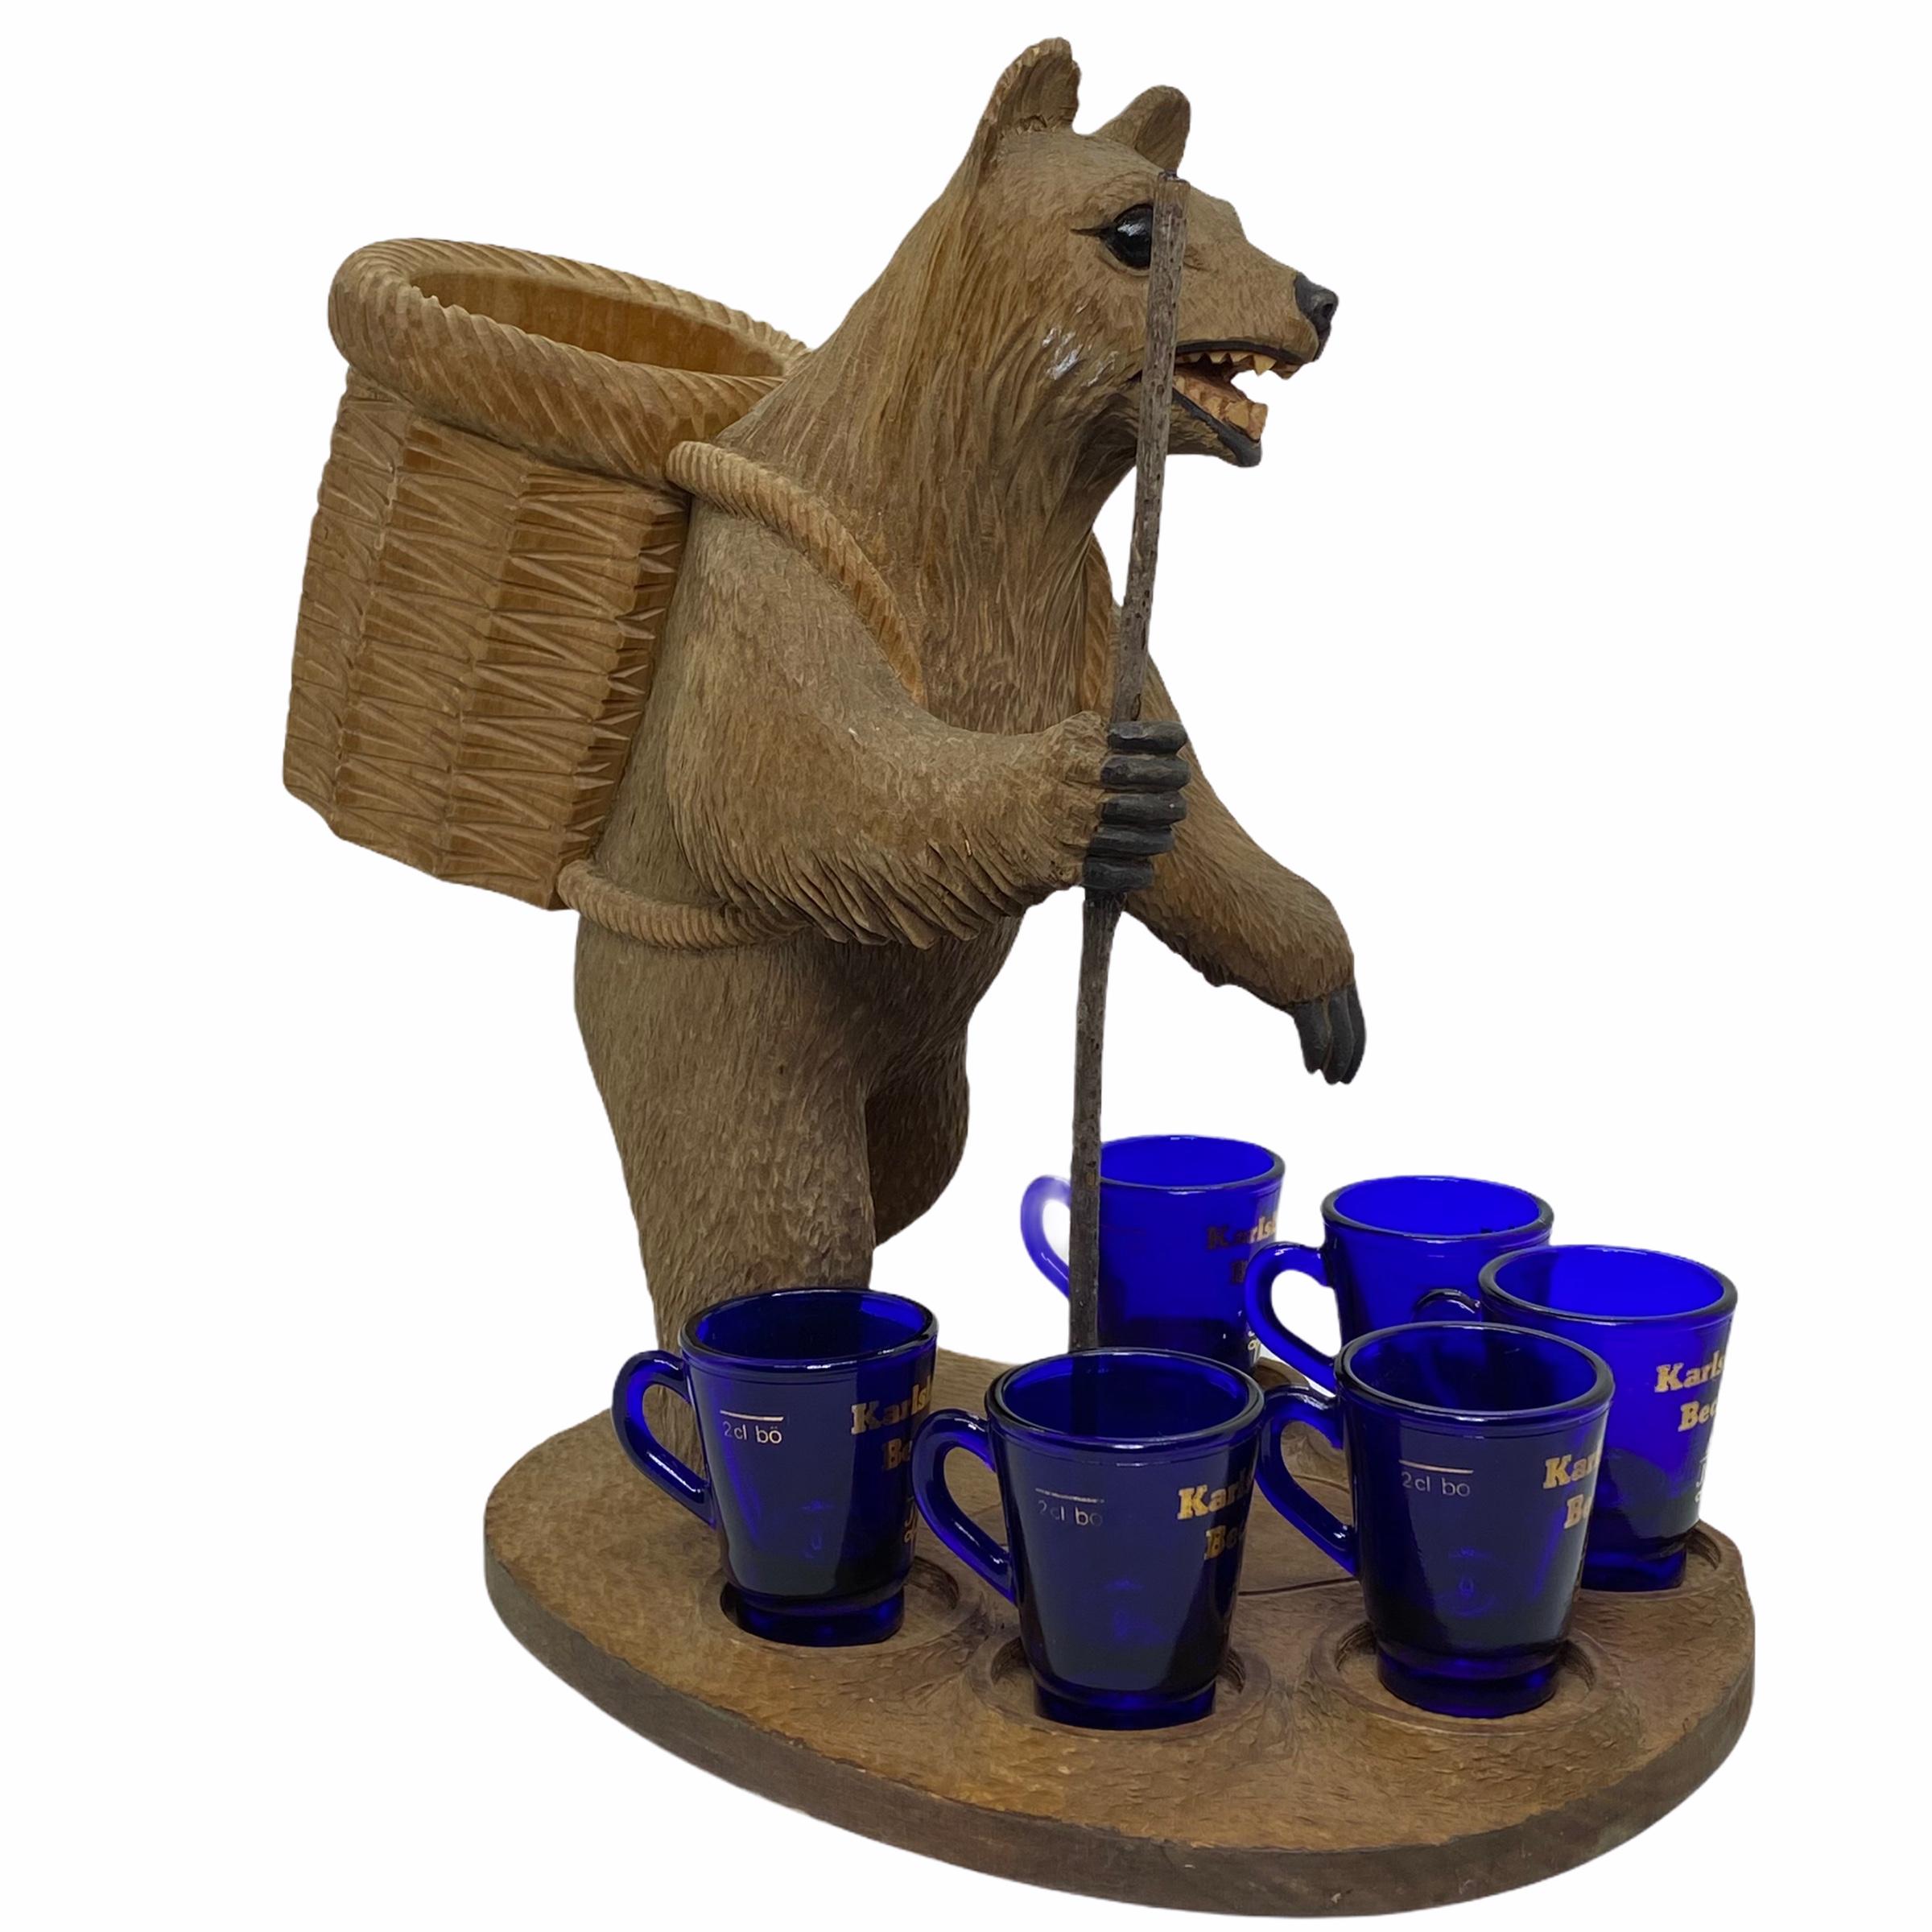 A 20th century Black Forest wood carved bear. Nice addition to your room or just for use it on your desk. Made of hand carved wood and has original Becherovka Schnaps Glasses. Signed at the base with artist signature. Found at an estate sale in